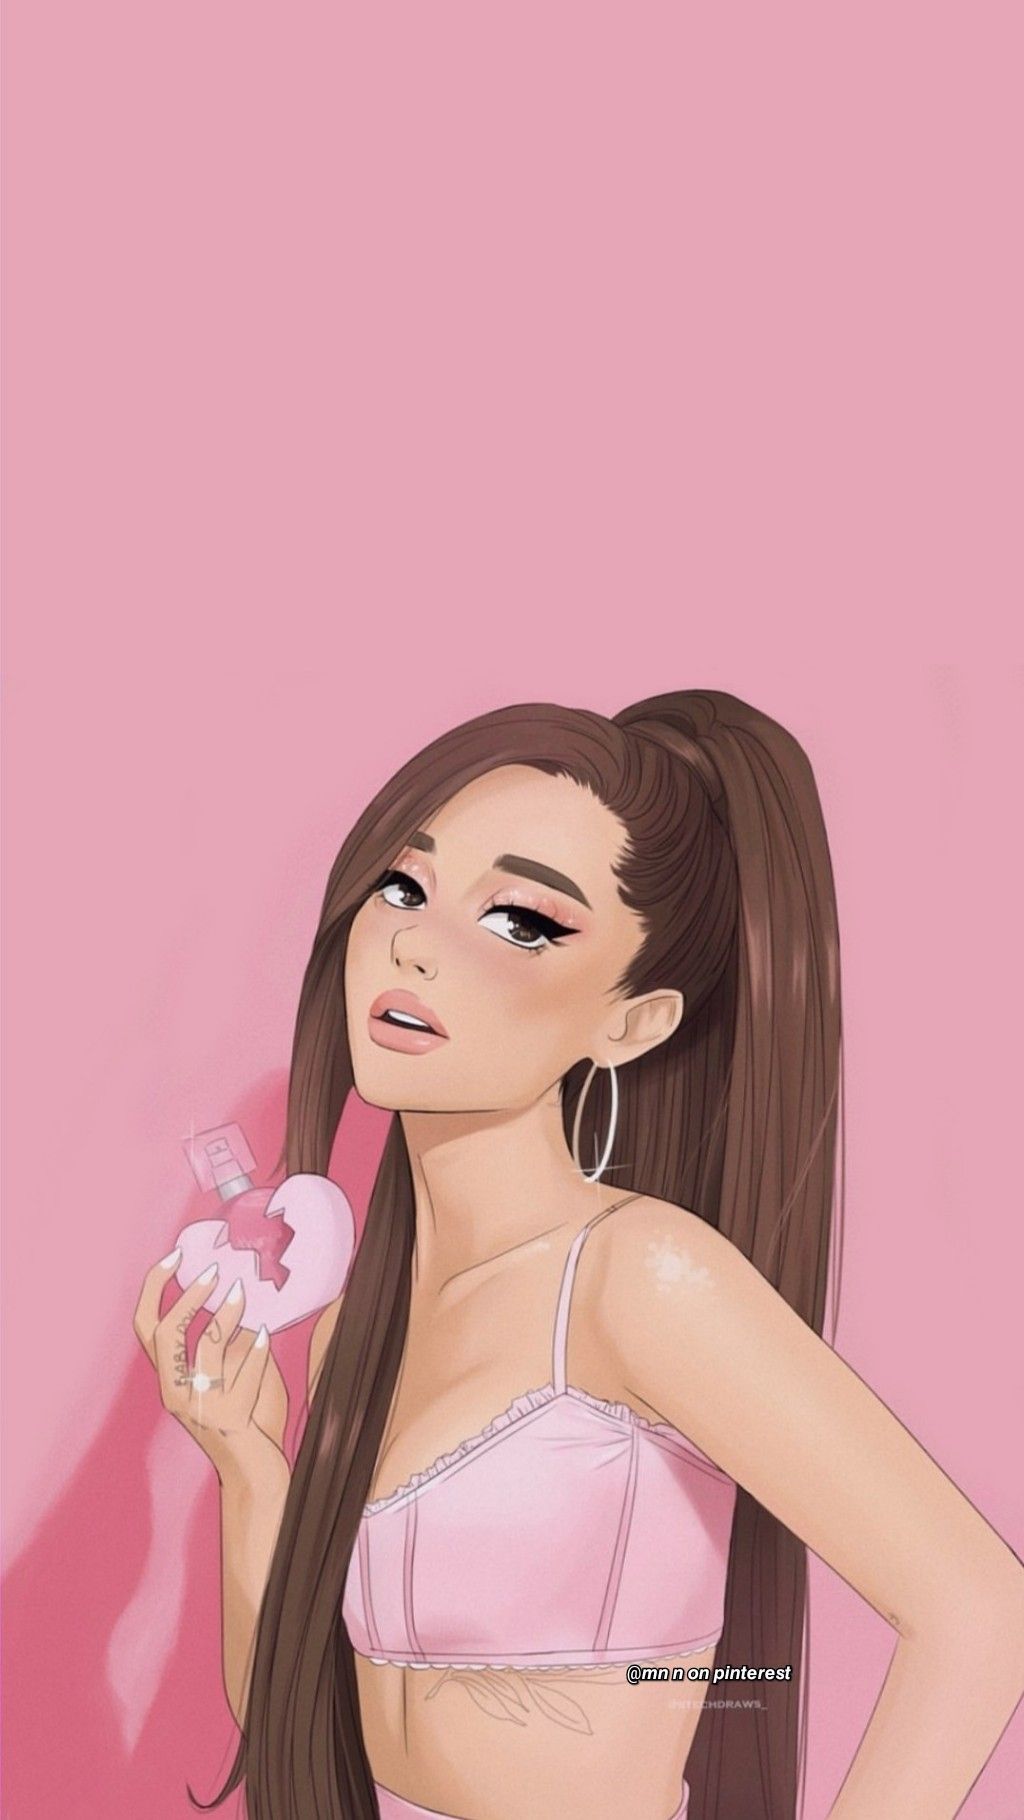 Ariana Grande Outline Pls Rate And U Can Request One - Sketch, HD Png  Download , Transparent Png Image - PNGitem